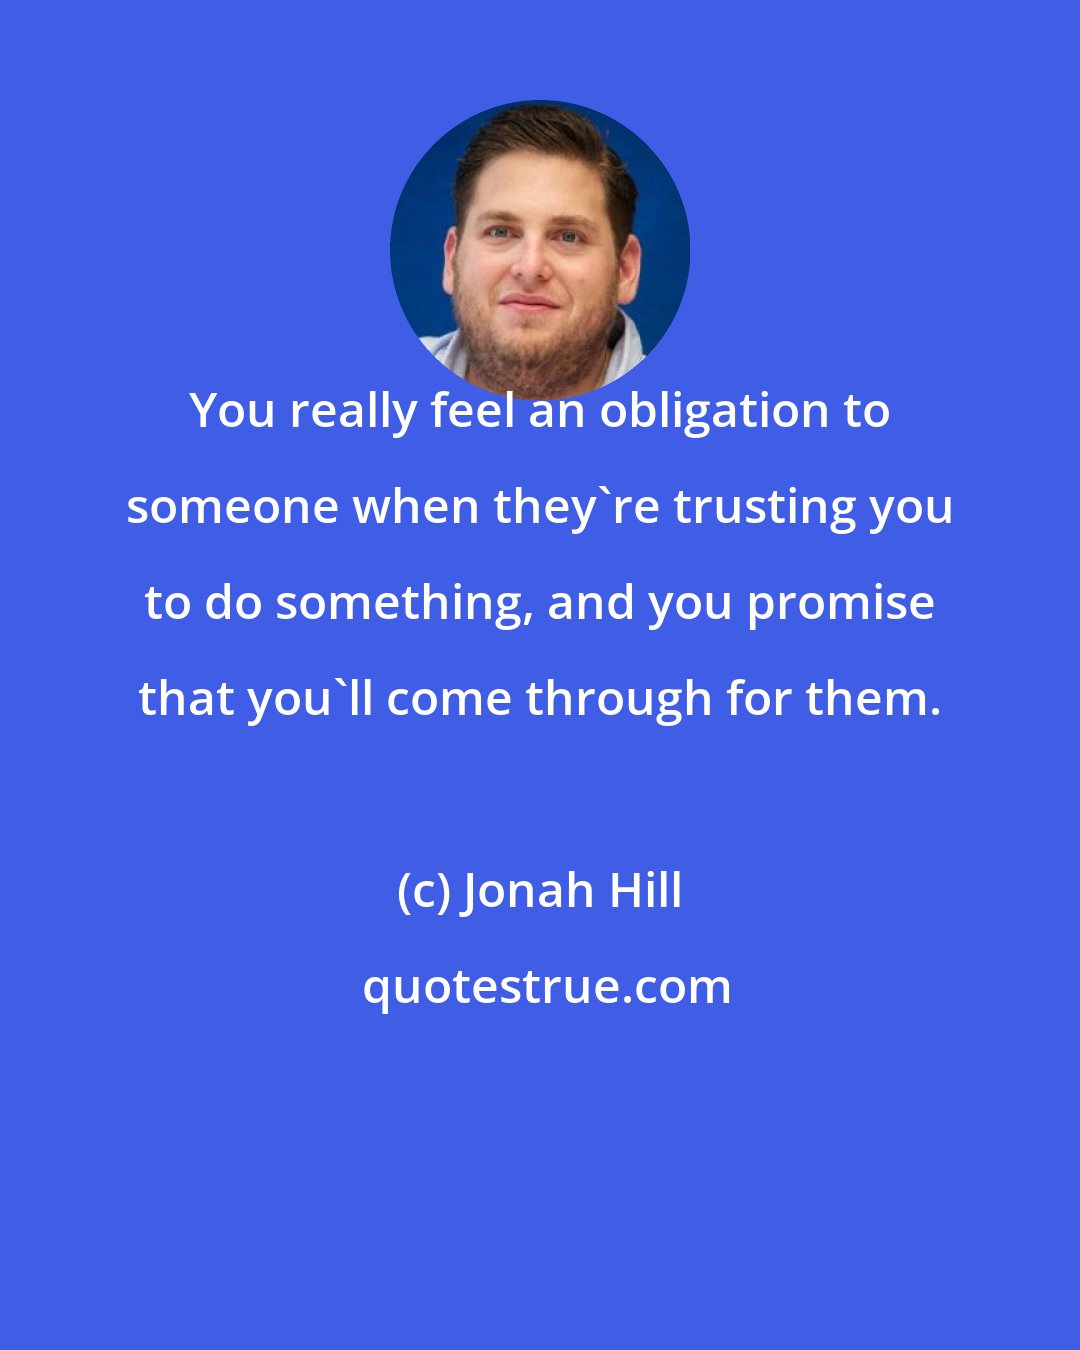 Jonah Hill: You really feel an obligation to someone when they're trusting you to do something, and you promise that you'll come through for them.